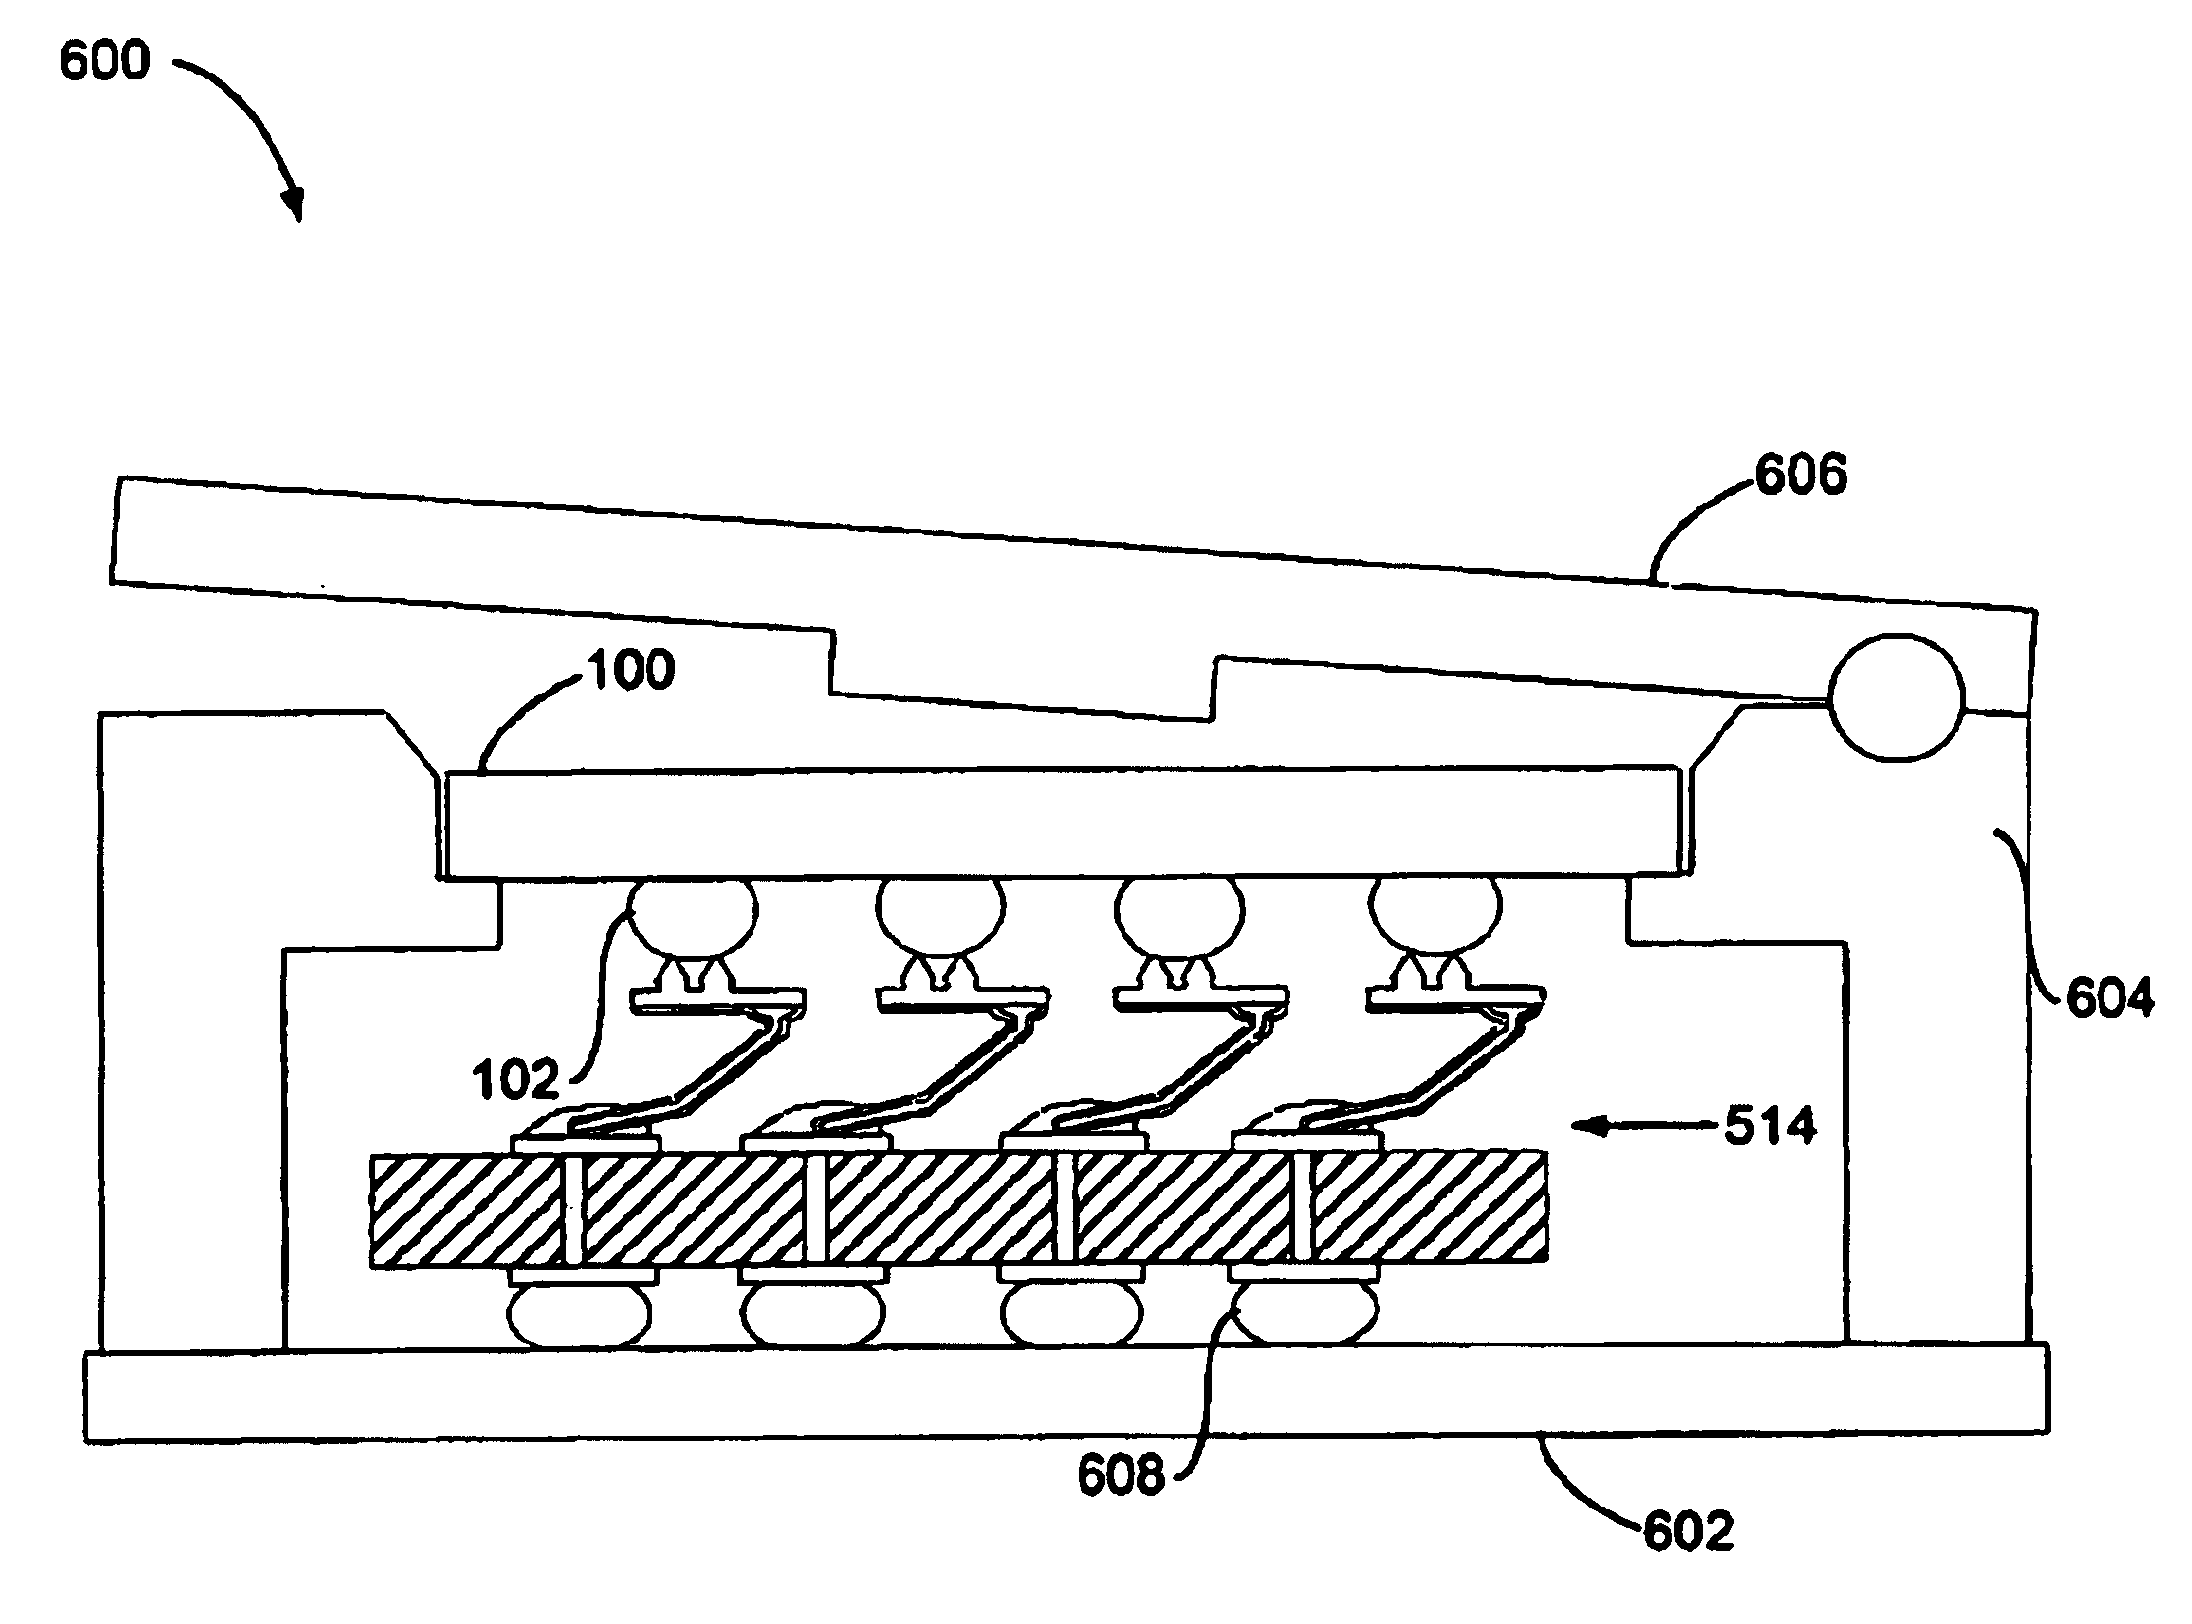 Method for making a socket to perform testing on integrated circuits